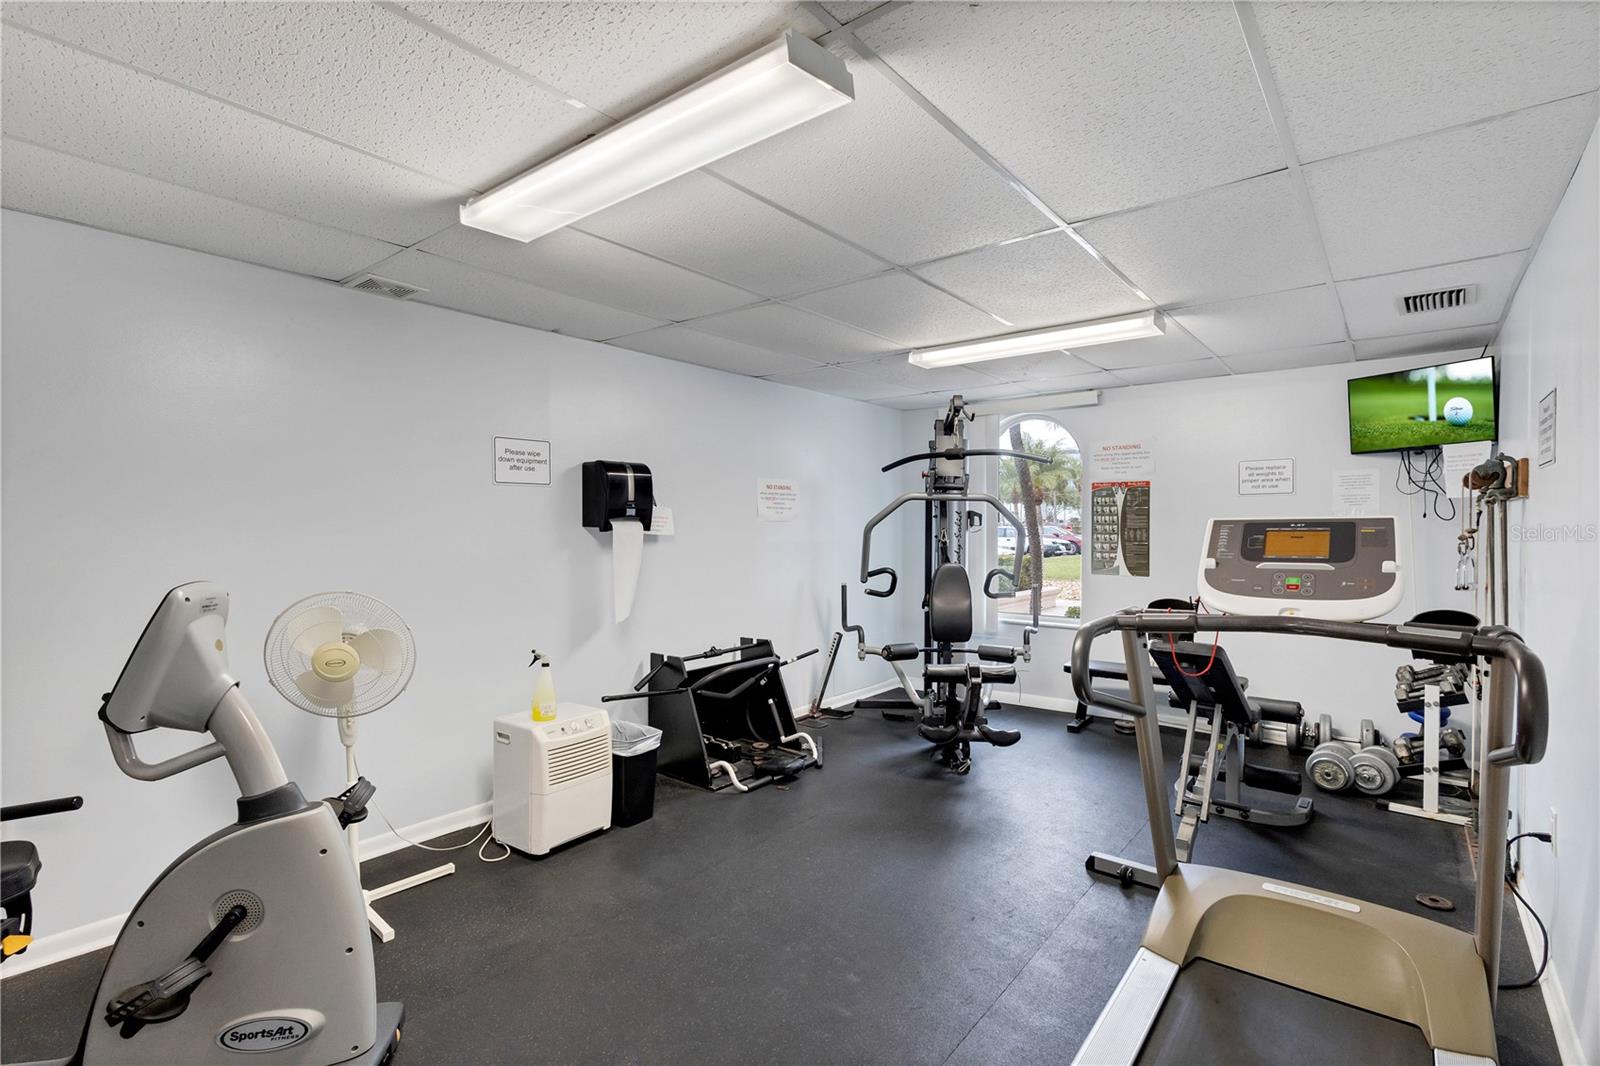 Separate fitness rooms for men and women